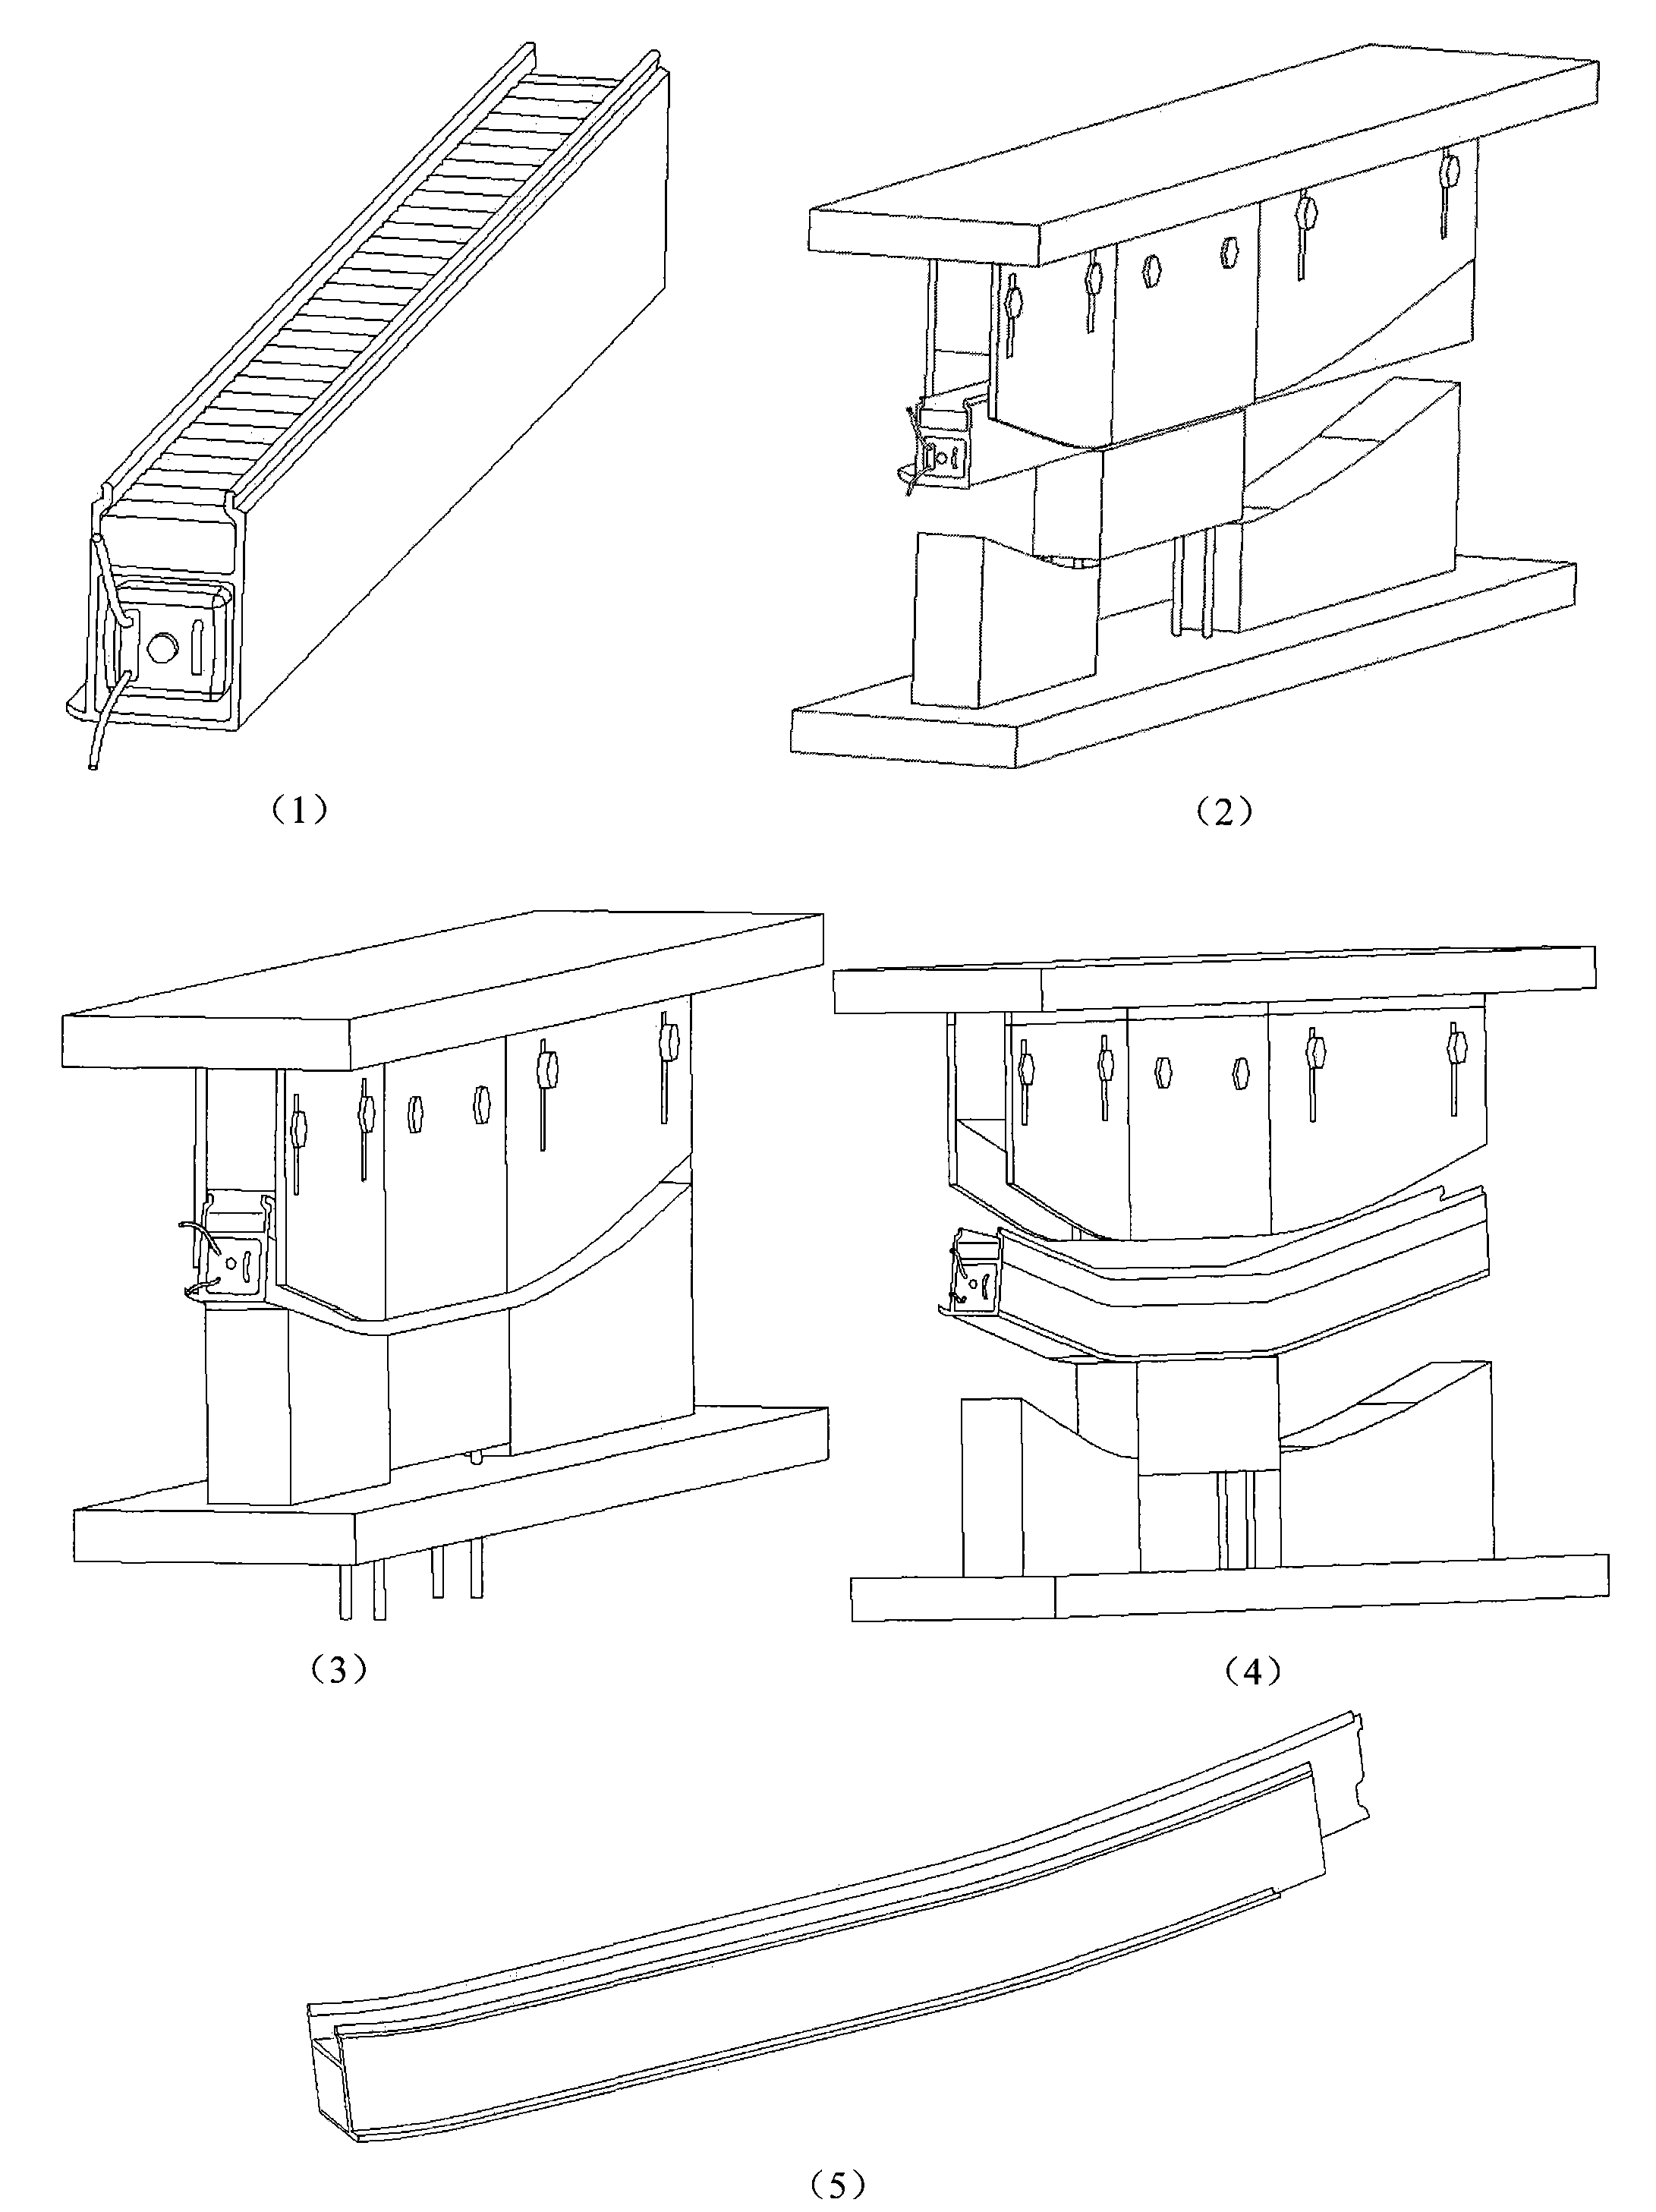 Method for bending and forming aluminum section side column member of railway vehicle body